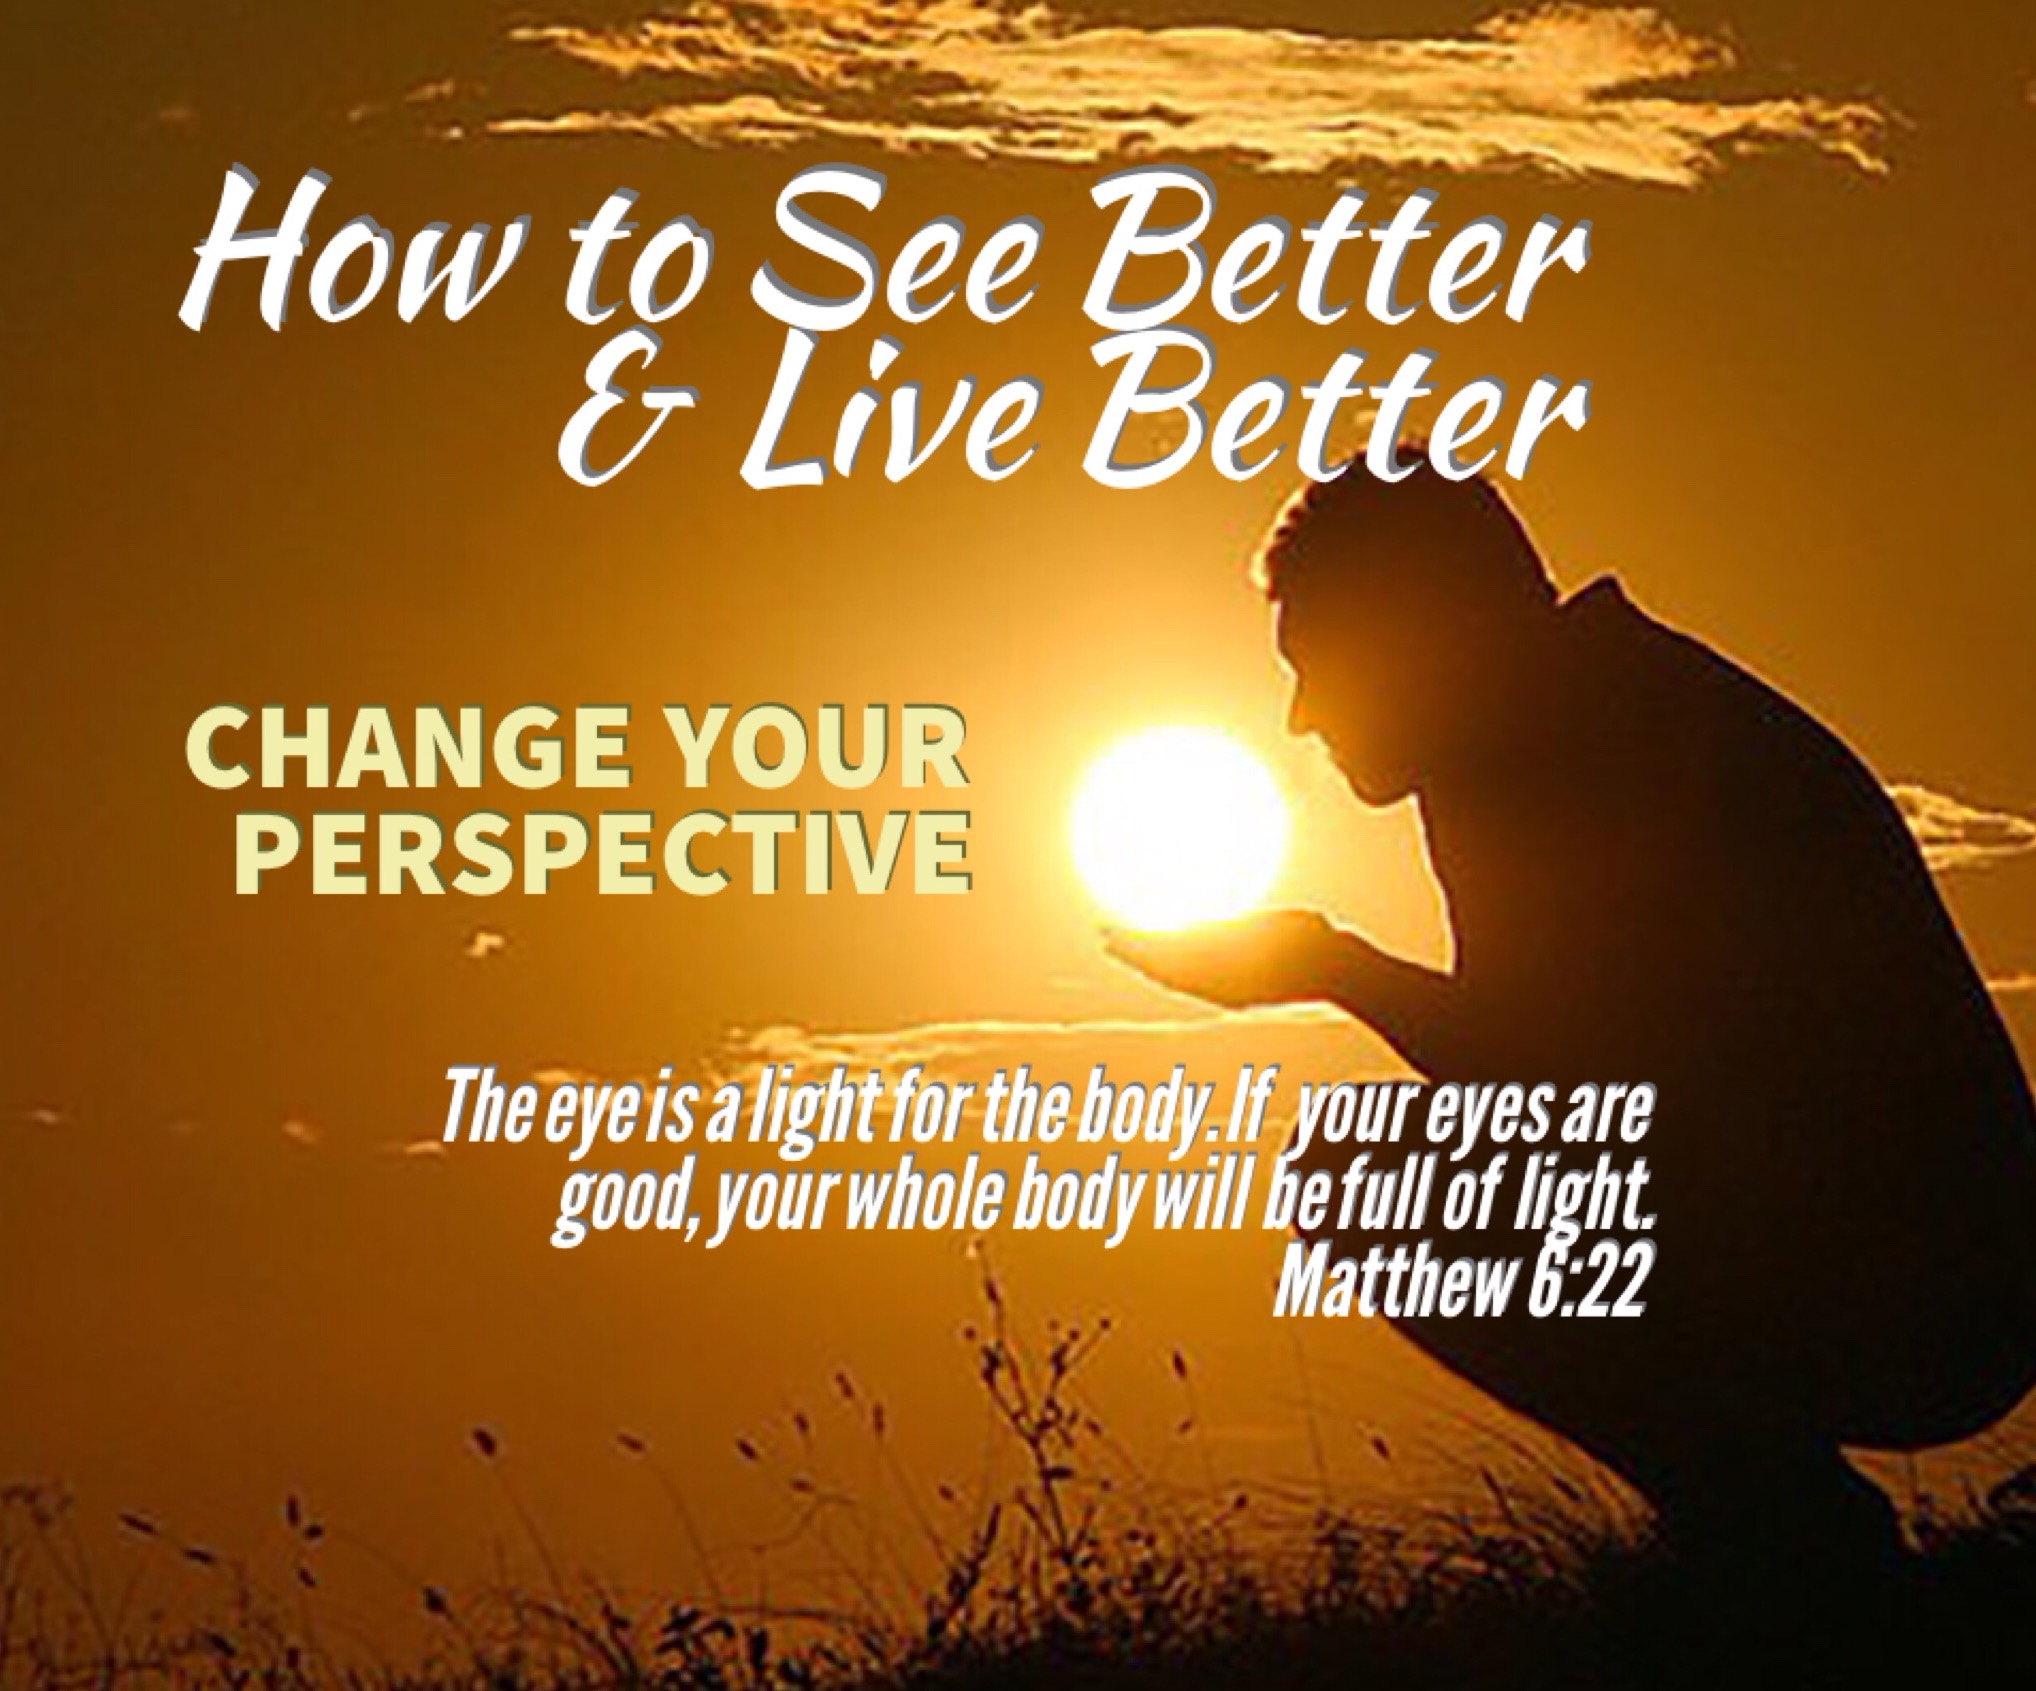 ”How to See Better & Live Better” - Pt. 2, Change Your Perspective